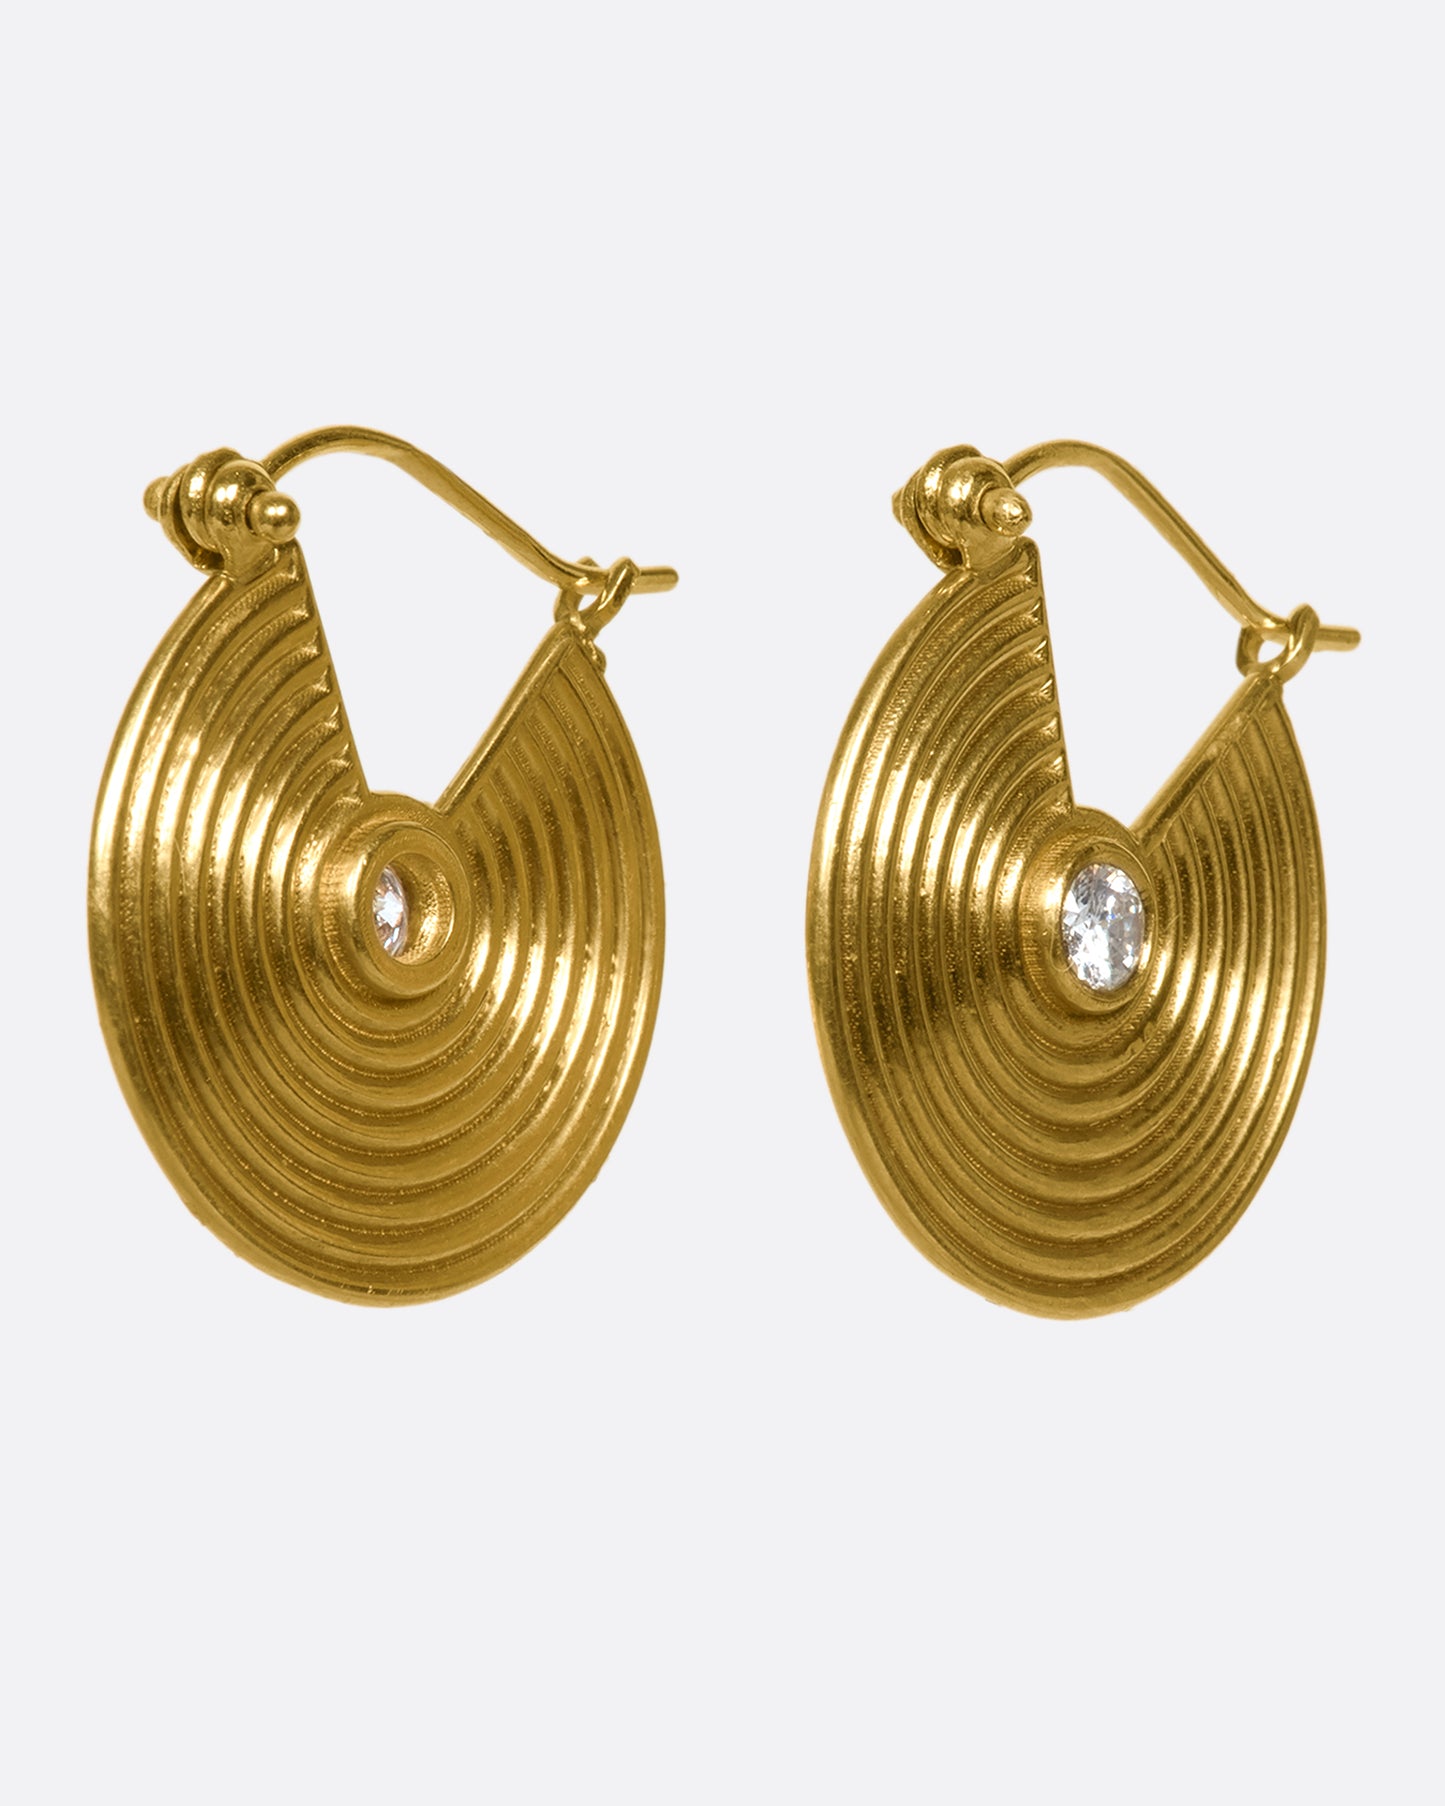 14k gold spiral hoops punctuated with white diamonds. Depending on the angle of your piercing, these may look like thin hoops or gold, ribbed discs from the front.